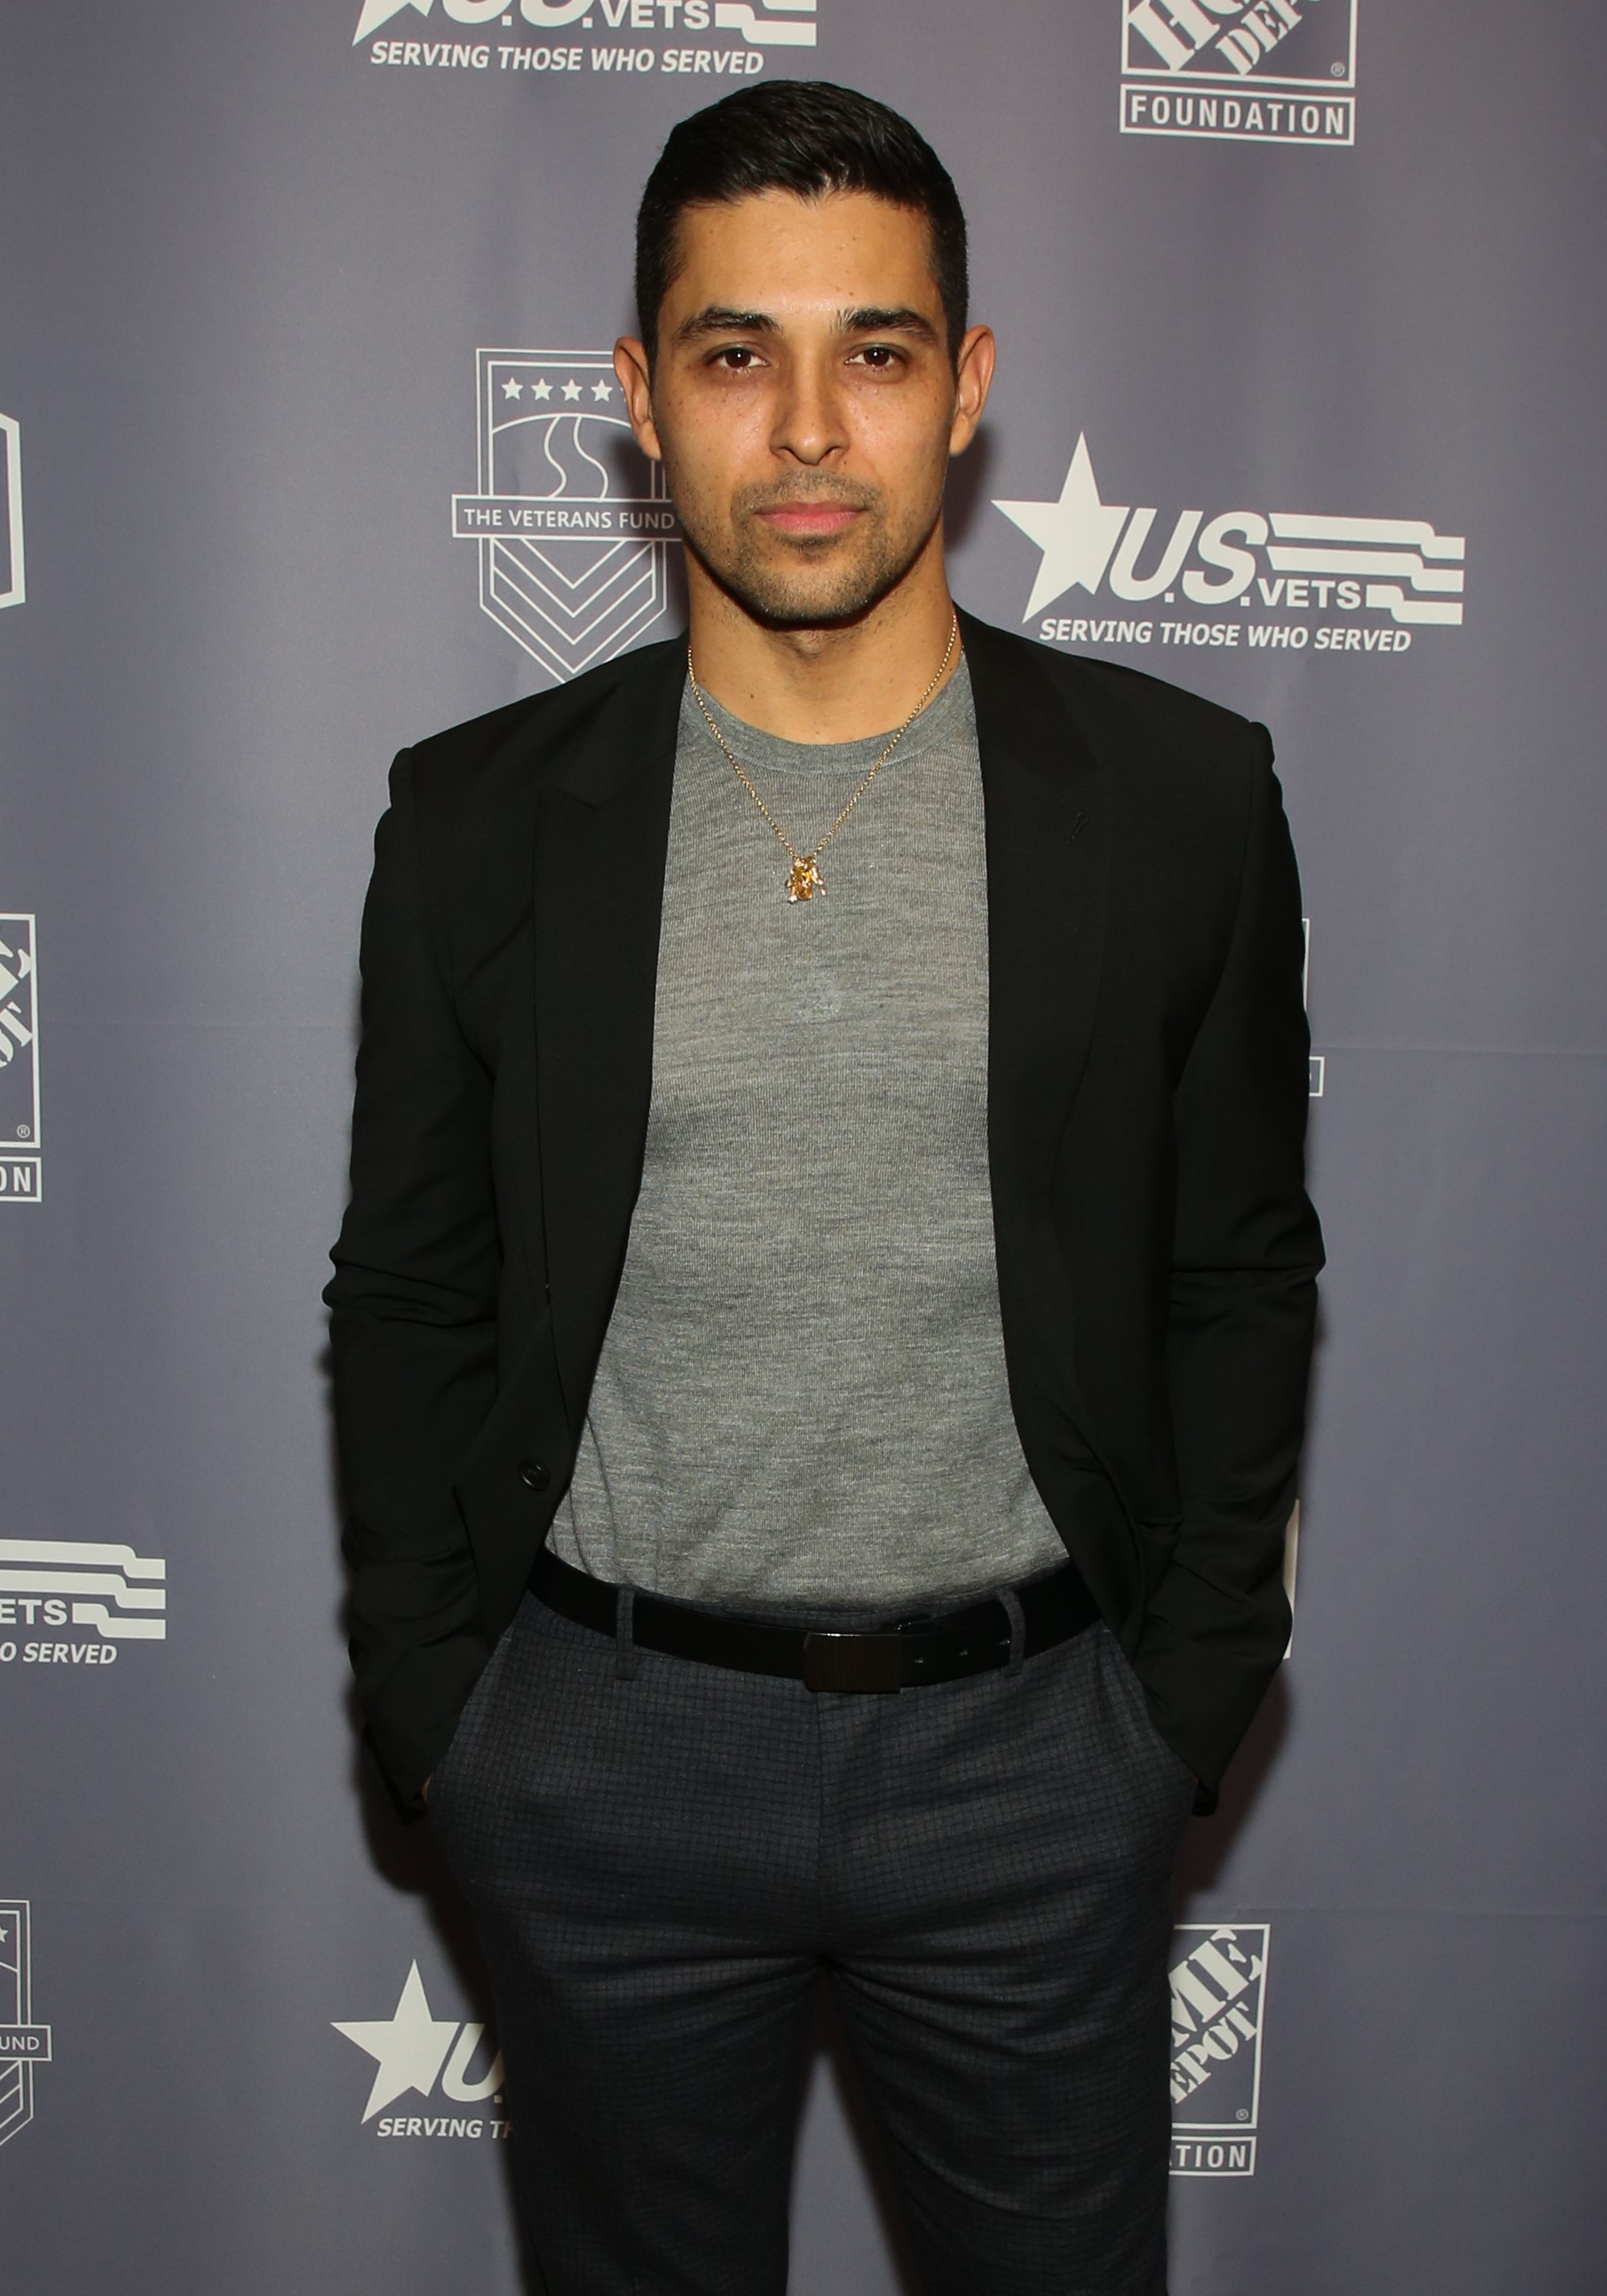 Actor Wilmer Valderrama attends the 2019 U.S. Vets Salute Gala at The Beverly Hilton Hotel on November 05, 2019. | Photo: Getty Images